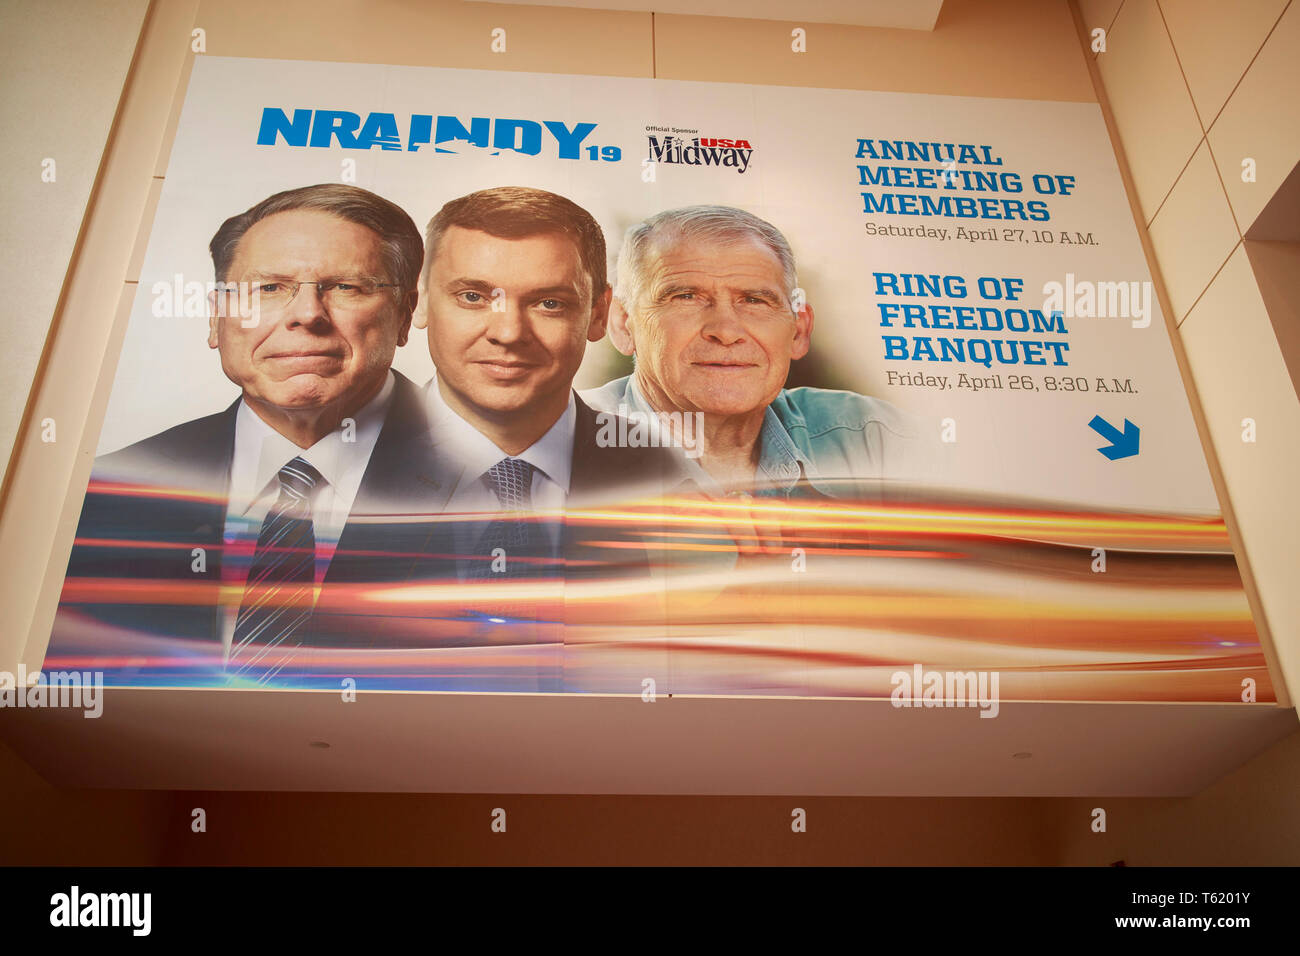 A photo of Chief Executive and Executive Vice President Wayne LaPierre, chief lobbyist and principal political strategist for the Institute for Legislative Action Chris Cox and former NRA president Oliver North, is displayed on the Indiana Convention Center during the third day of the National Rifle Association convention. Stock Photo